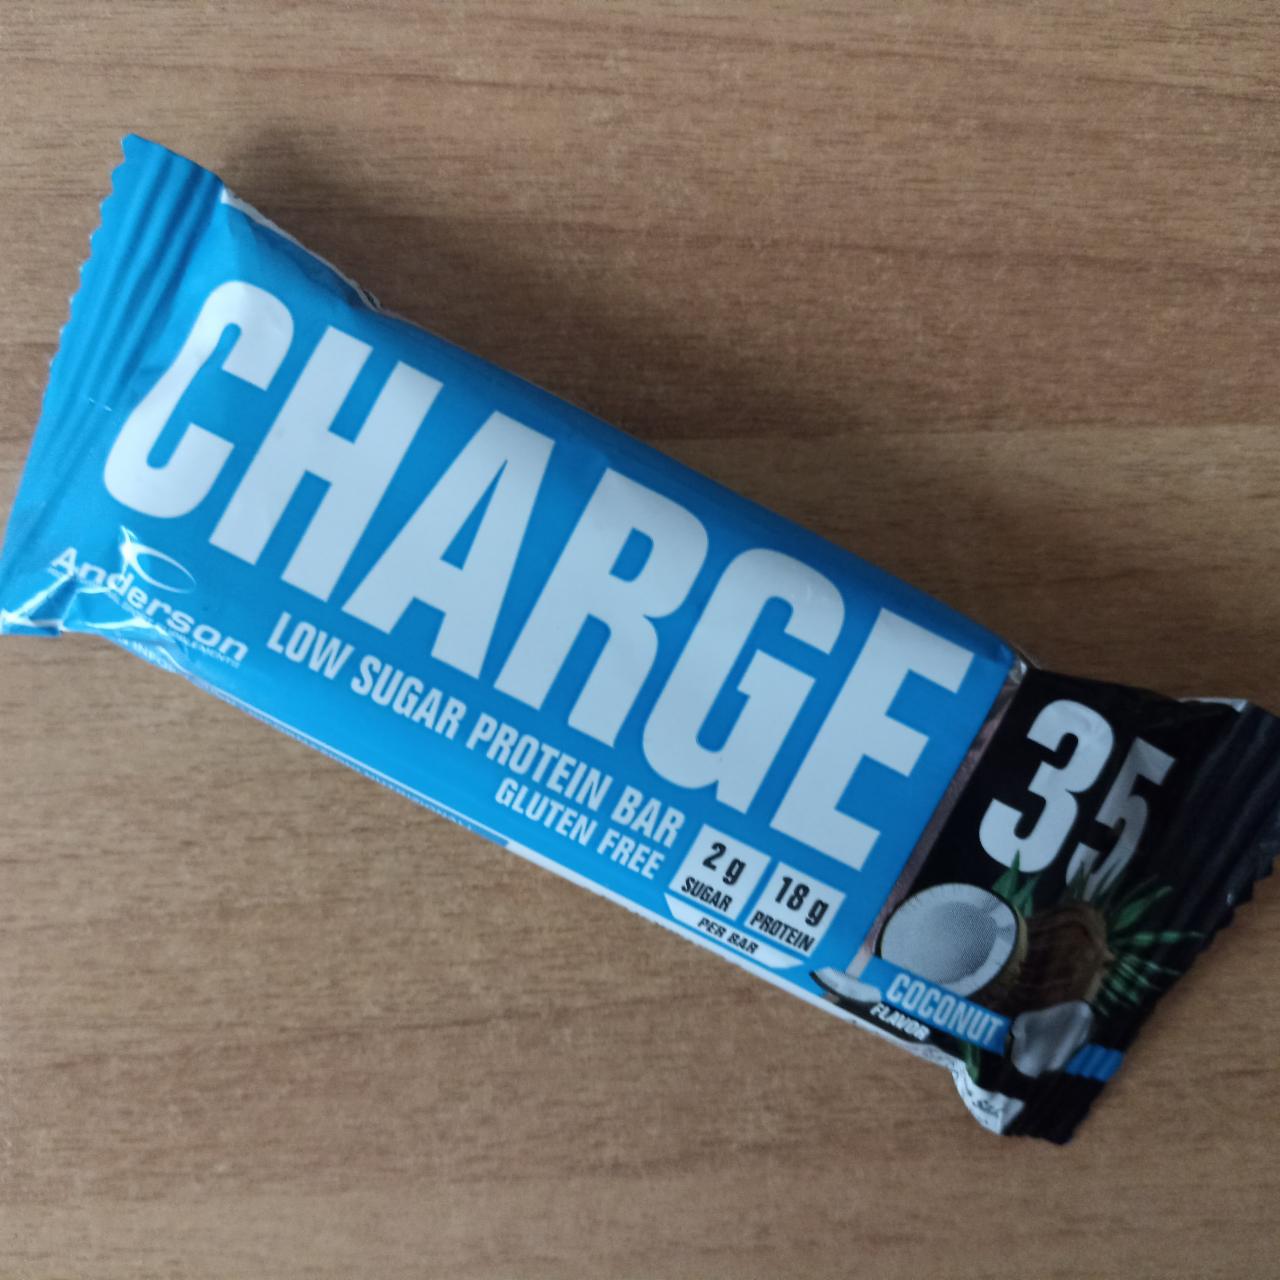 Fotografie - Charge low sugar protein bar Coconut Anderson